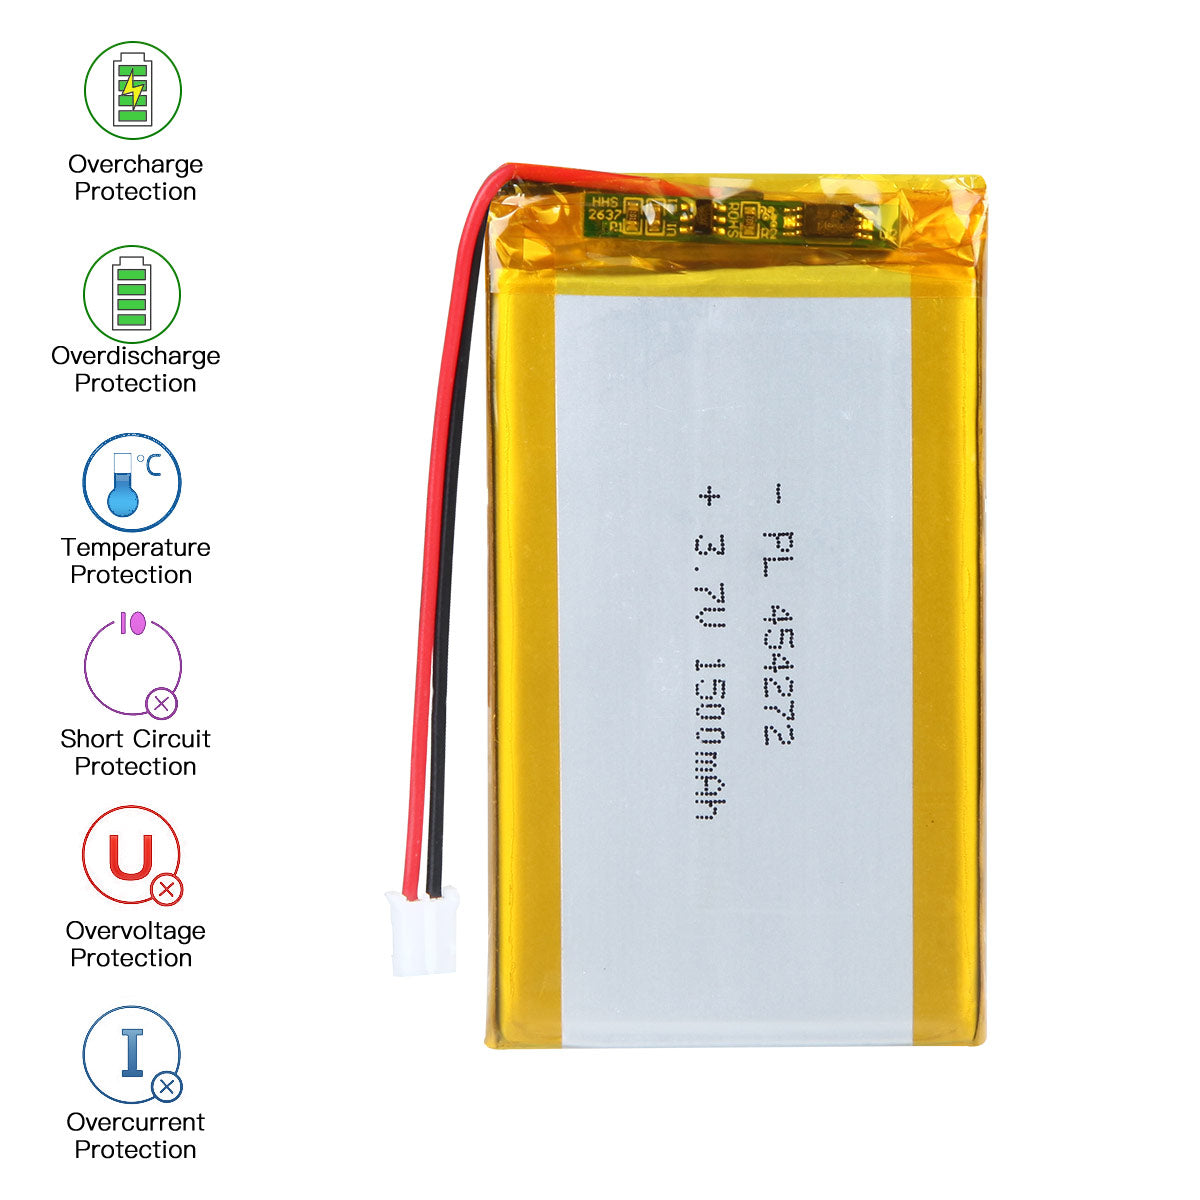 YDL 3.7V 1500mAh 454272 Rechargeable Lithium Polymer Battery Length 74mm